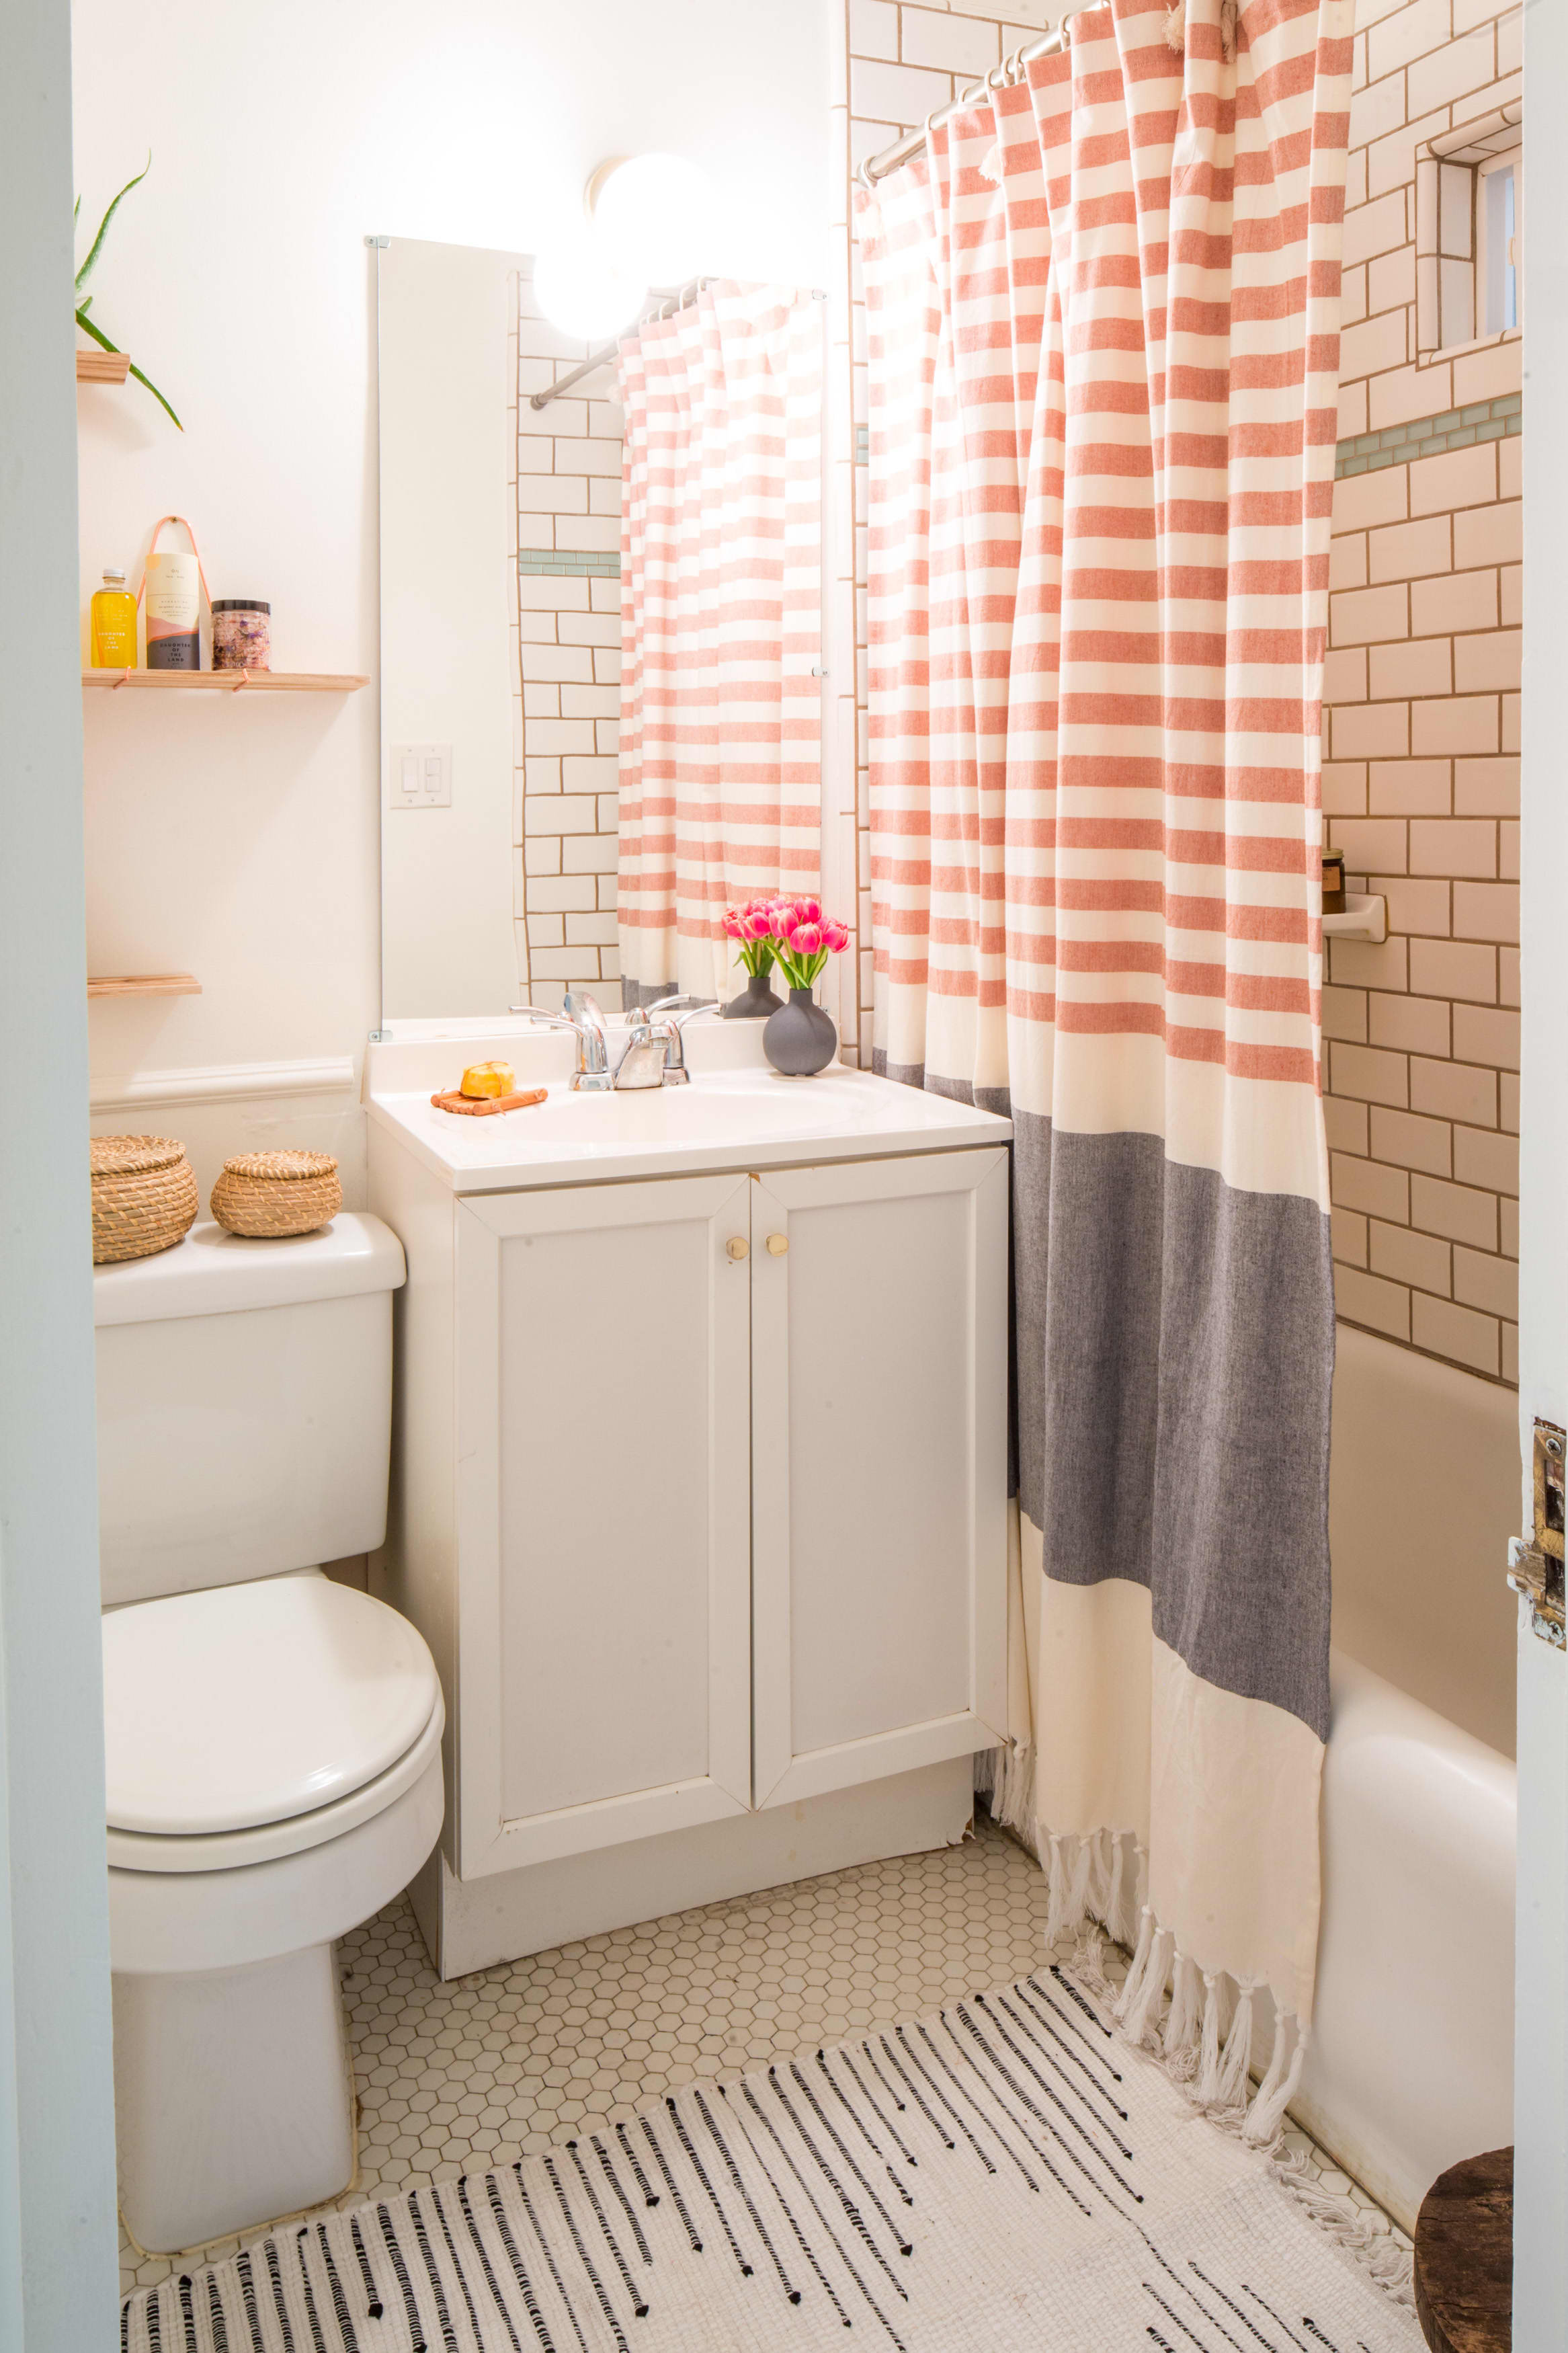 60 Small Bathroom Ideas For Decorating Tiny Spaces | Apartment Therapy